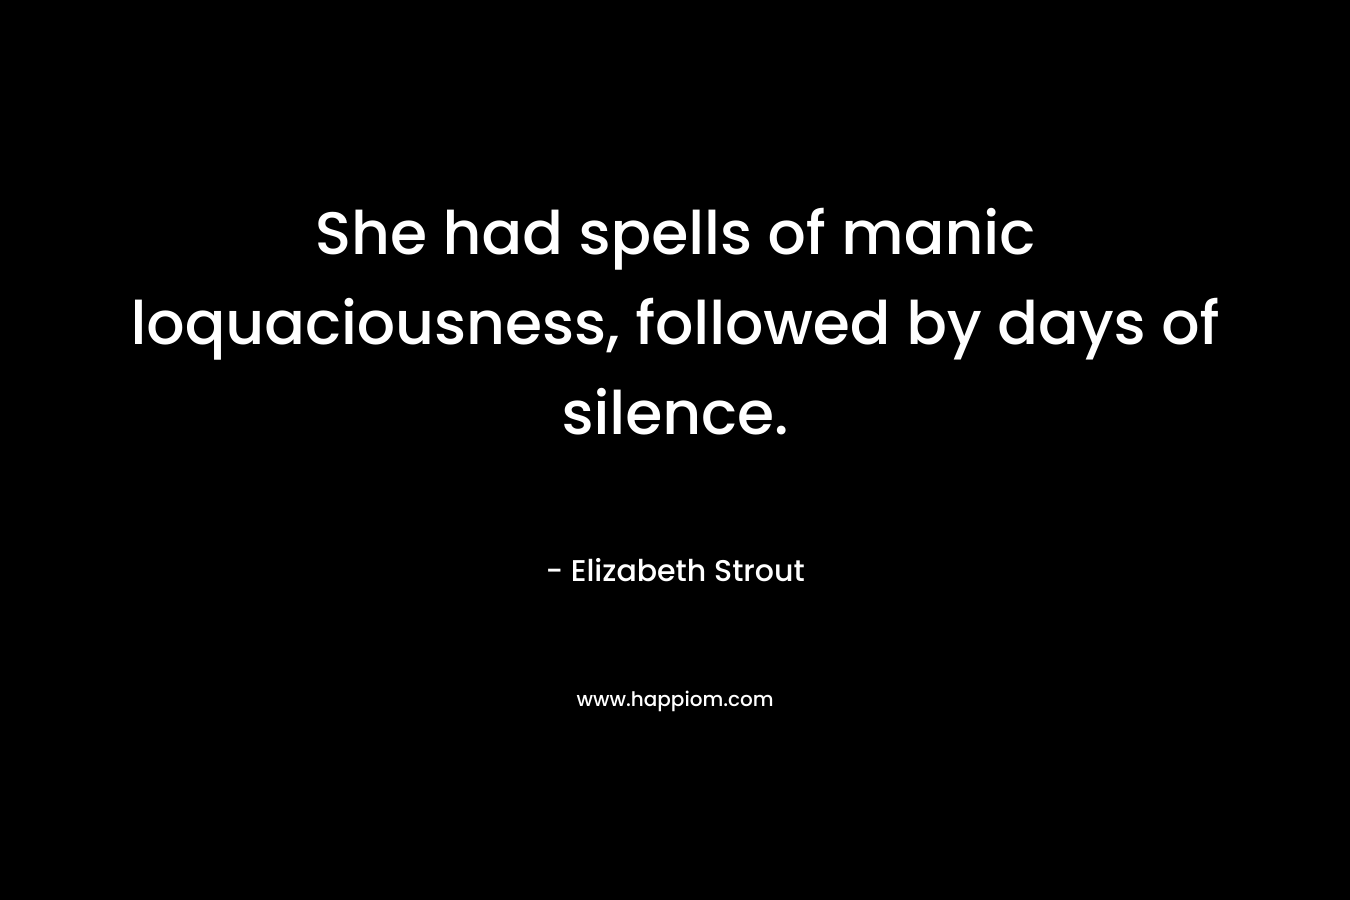 She had spells of manic loquaciousness, followed by days of silence. – Elizabeth Strout